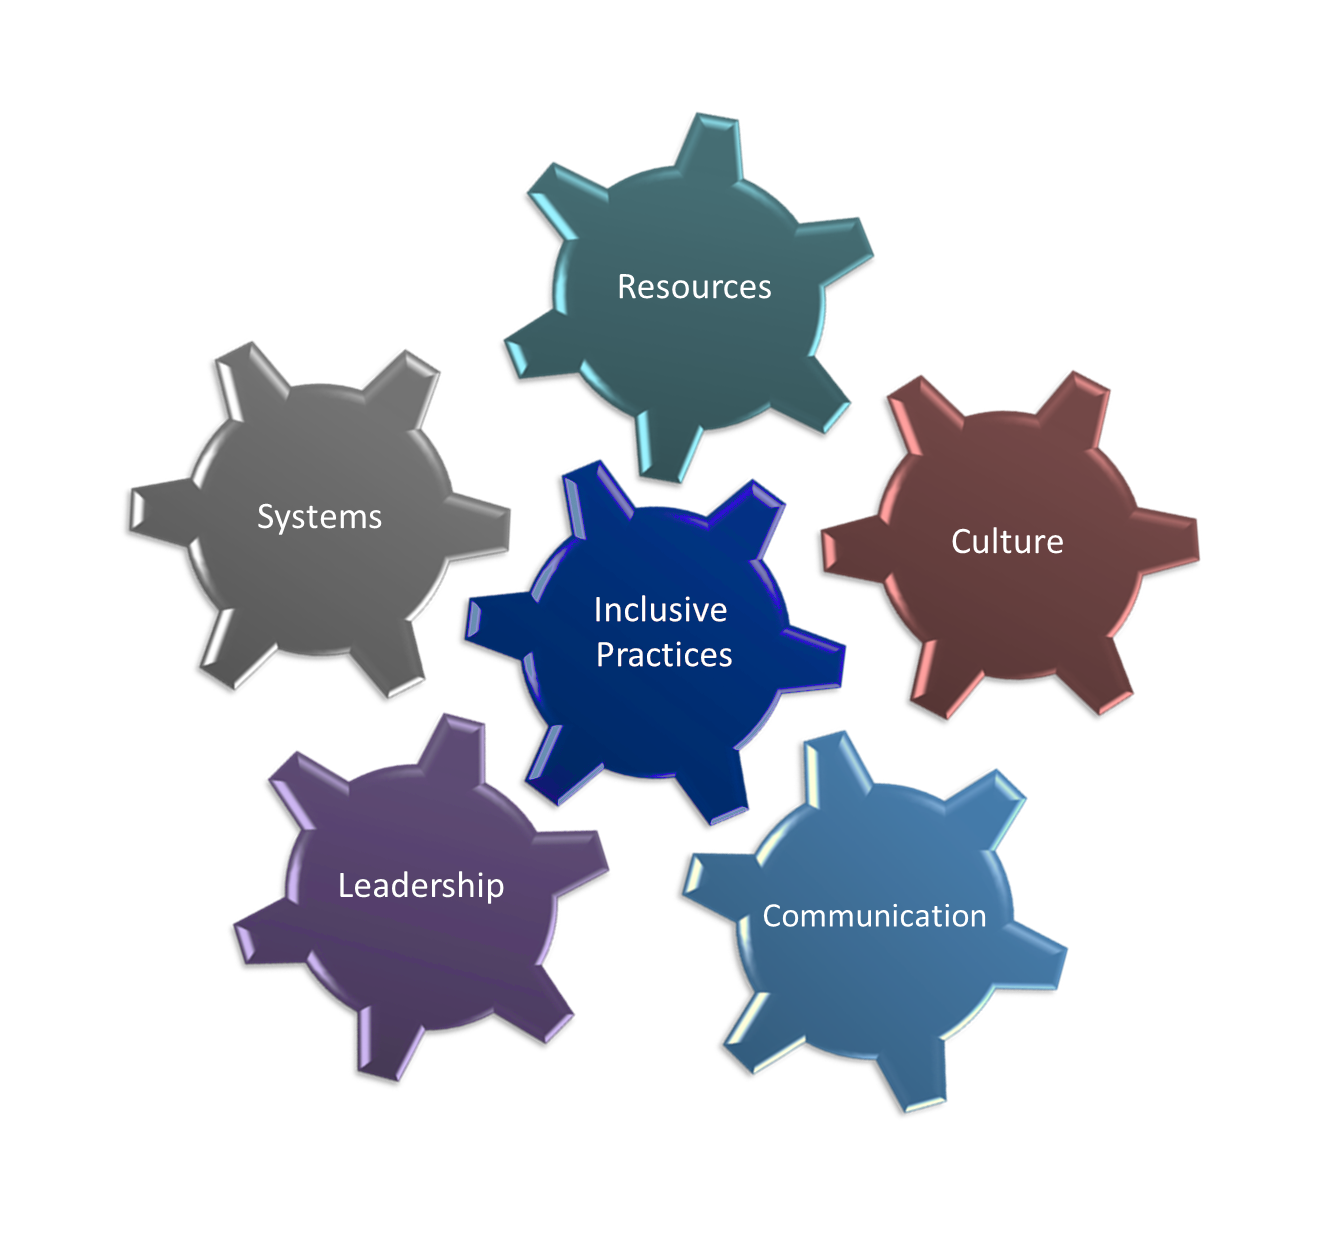 Inclusive practices have five integral parts: Resources, Culture, Communication, Leadership, and Systems